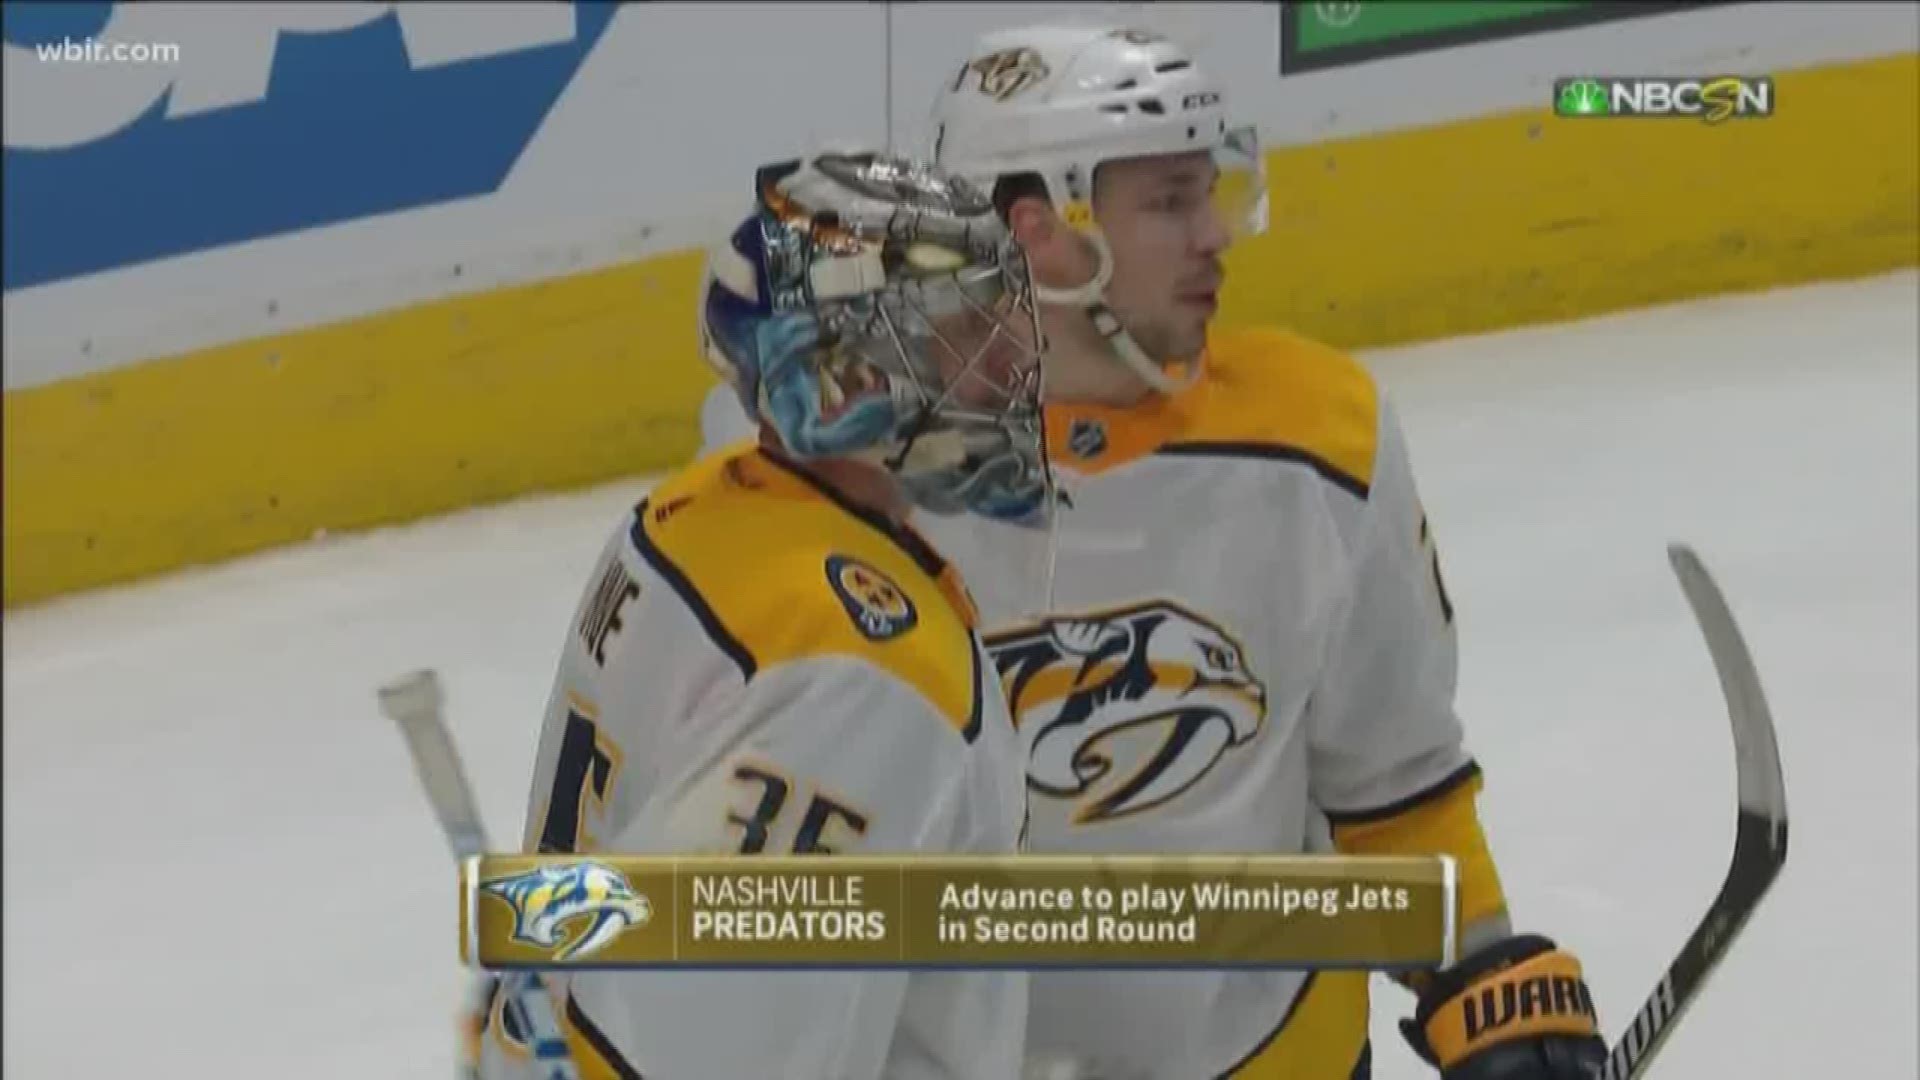 The Predators eliminated the Avalanche from the series on Sunday.